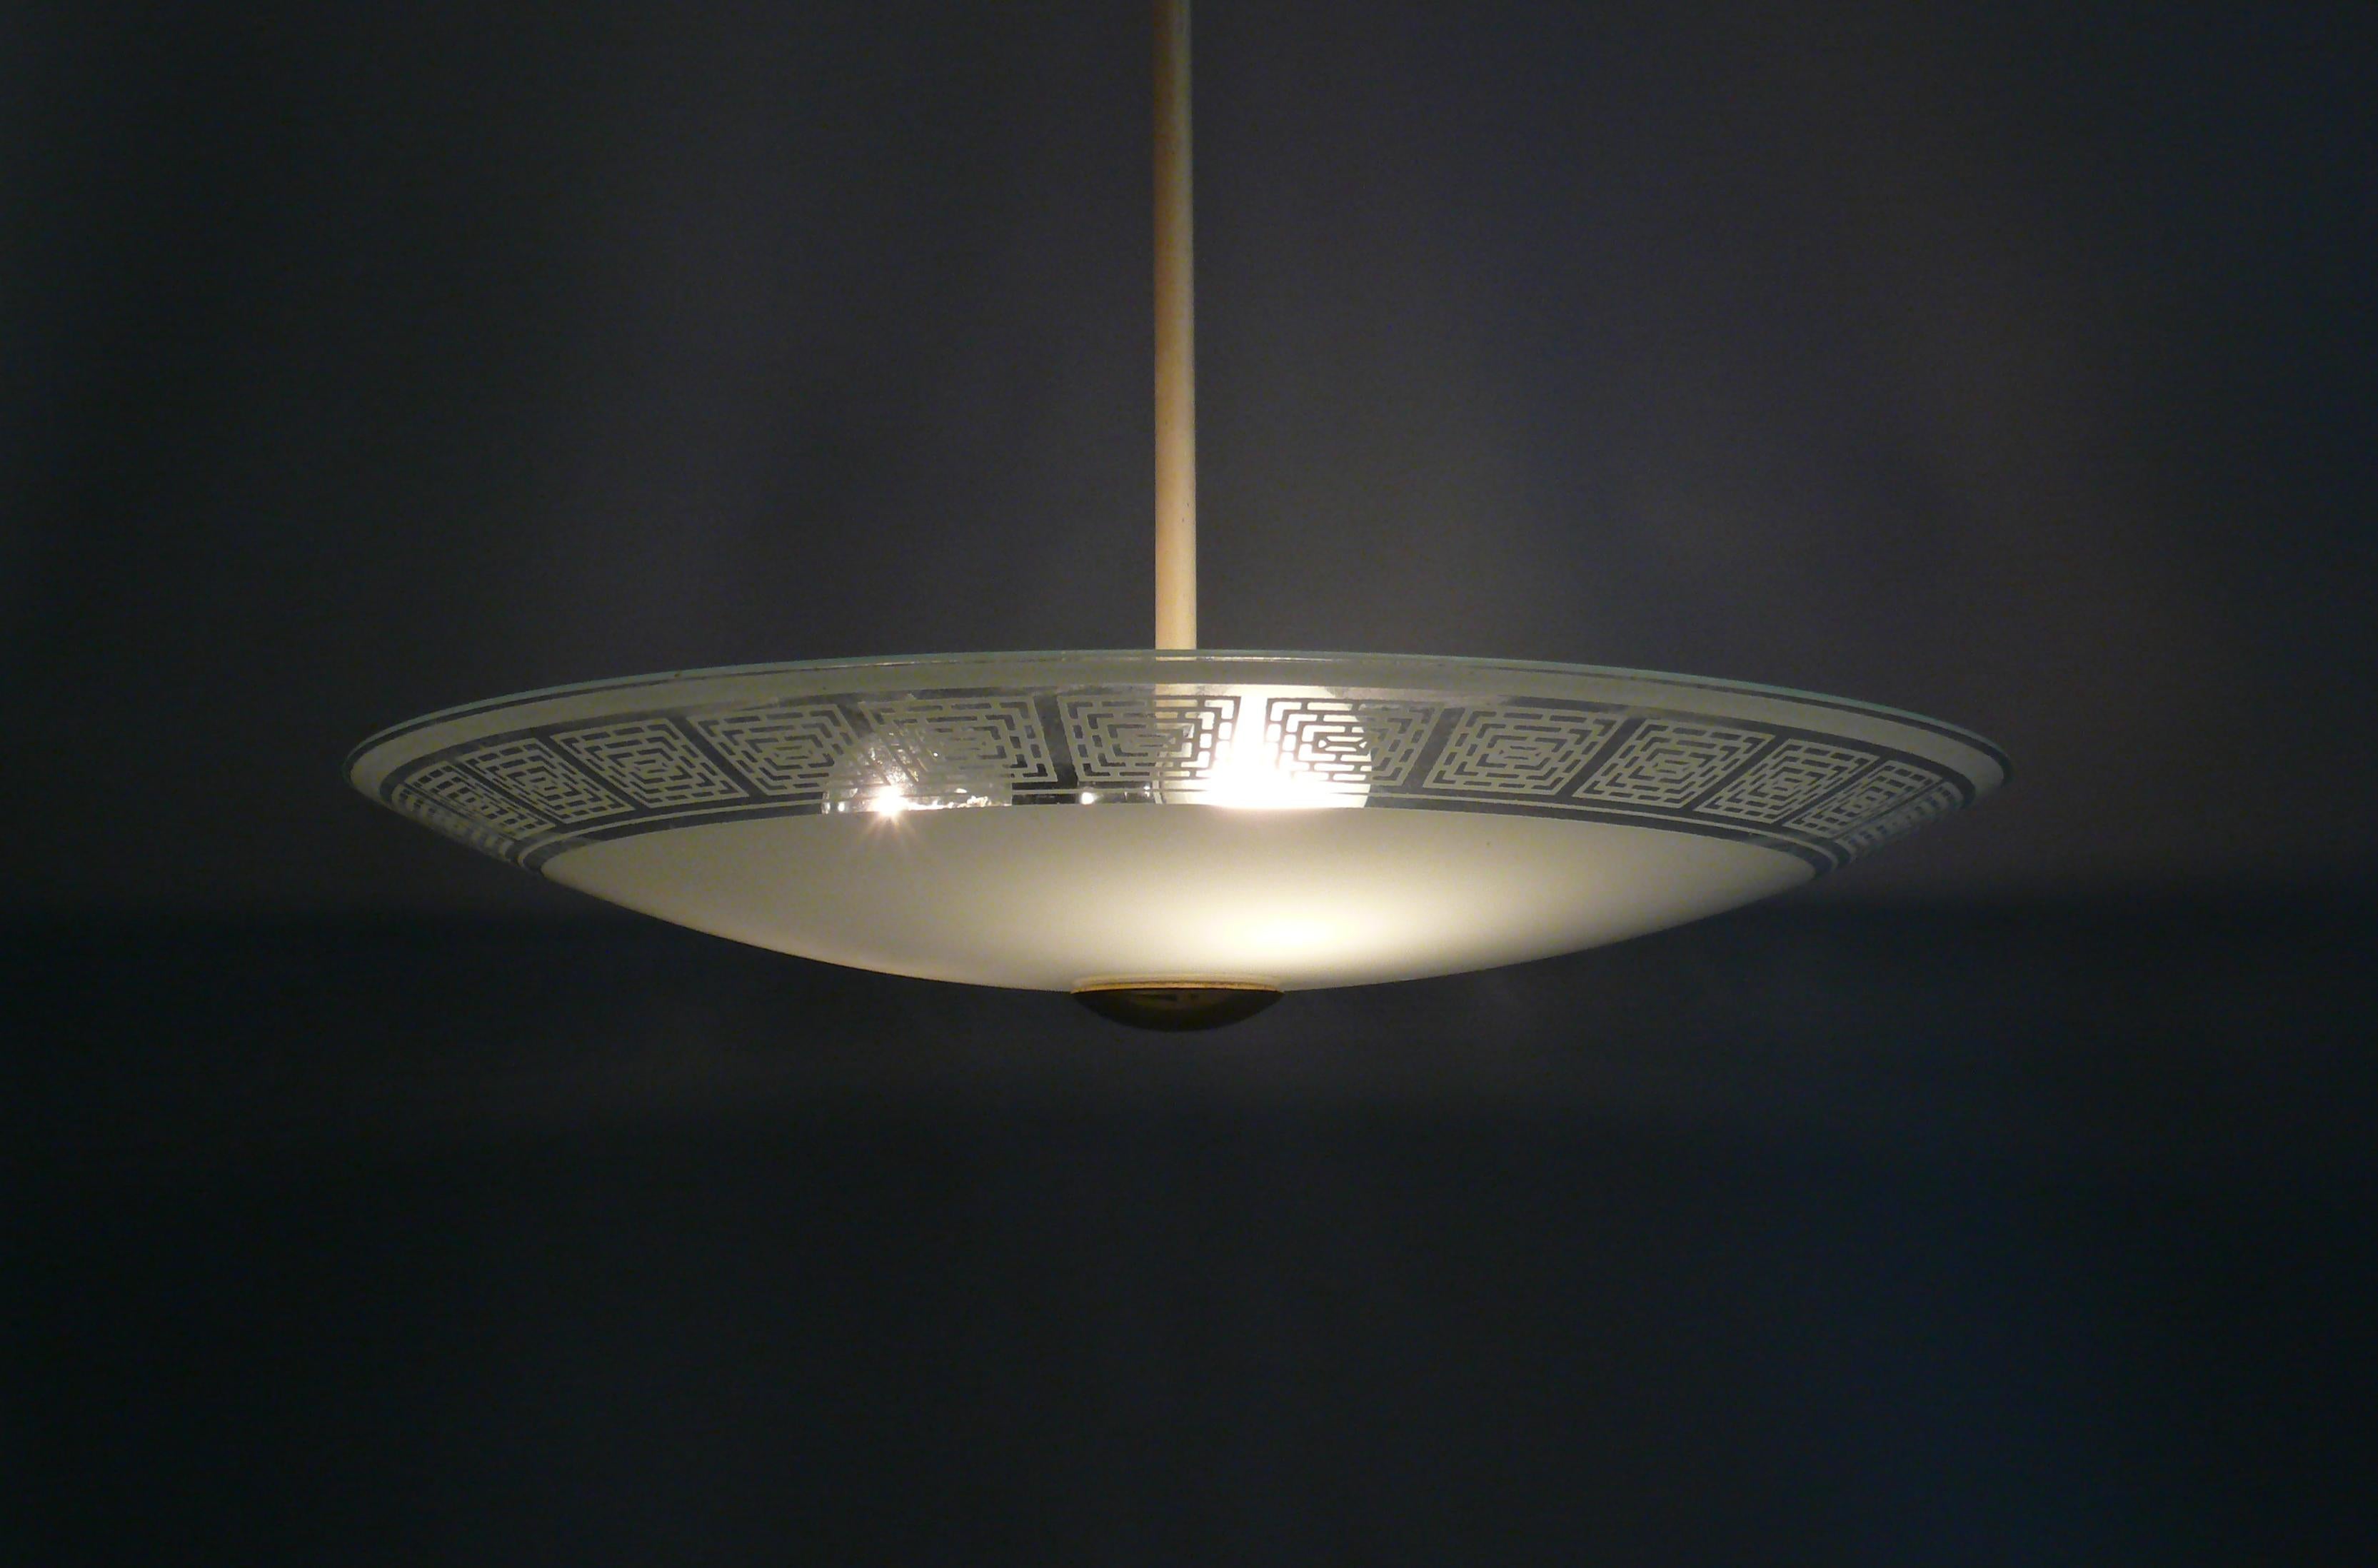 Very large rod pendant lamp from the 1950s with a bowl-shaped shade and coated rod. The UFO-shaped glass shade has a blue-gray color and geometric patterns with transparent areas around the edge. The lower end button is made of brass or